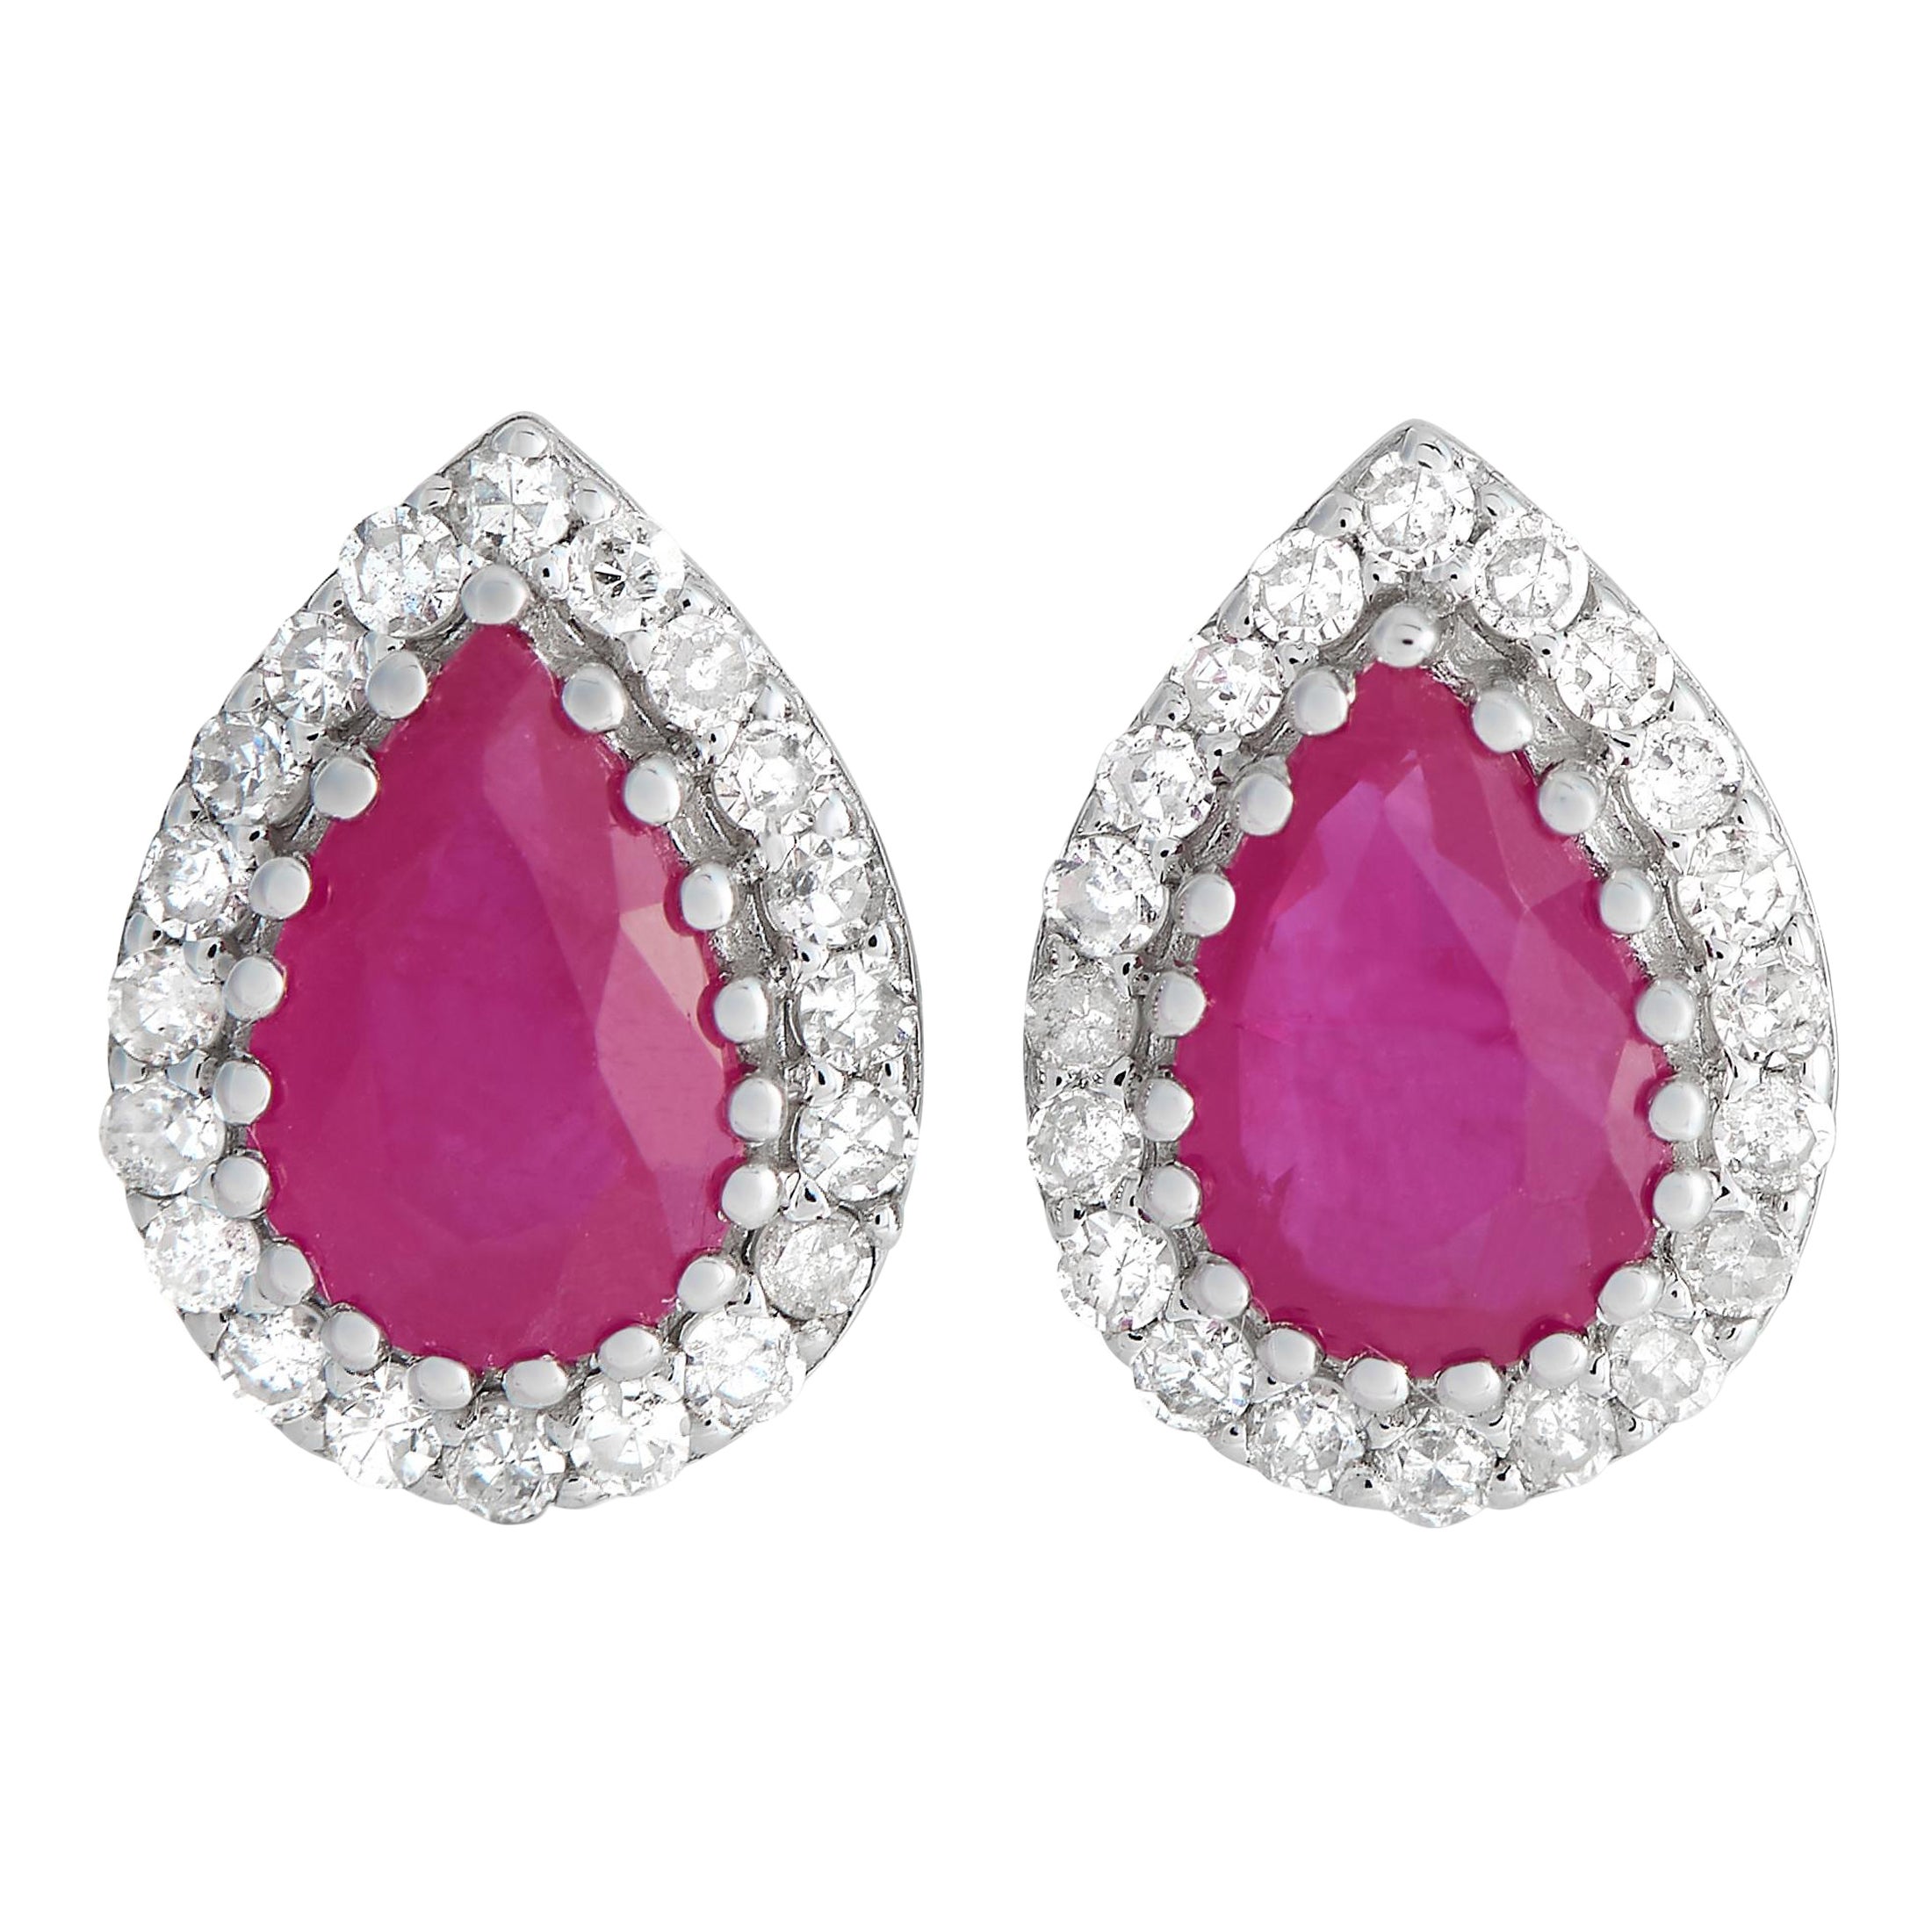 LB Exclusive 14K White Gold 0.17ct Diamond & Ruby Pear Stud Earring ER4-15272WRU For Sale